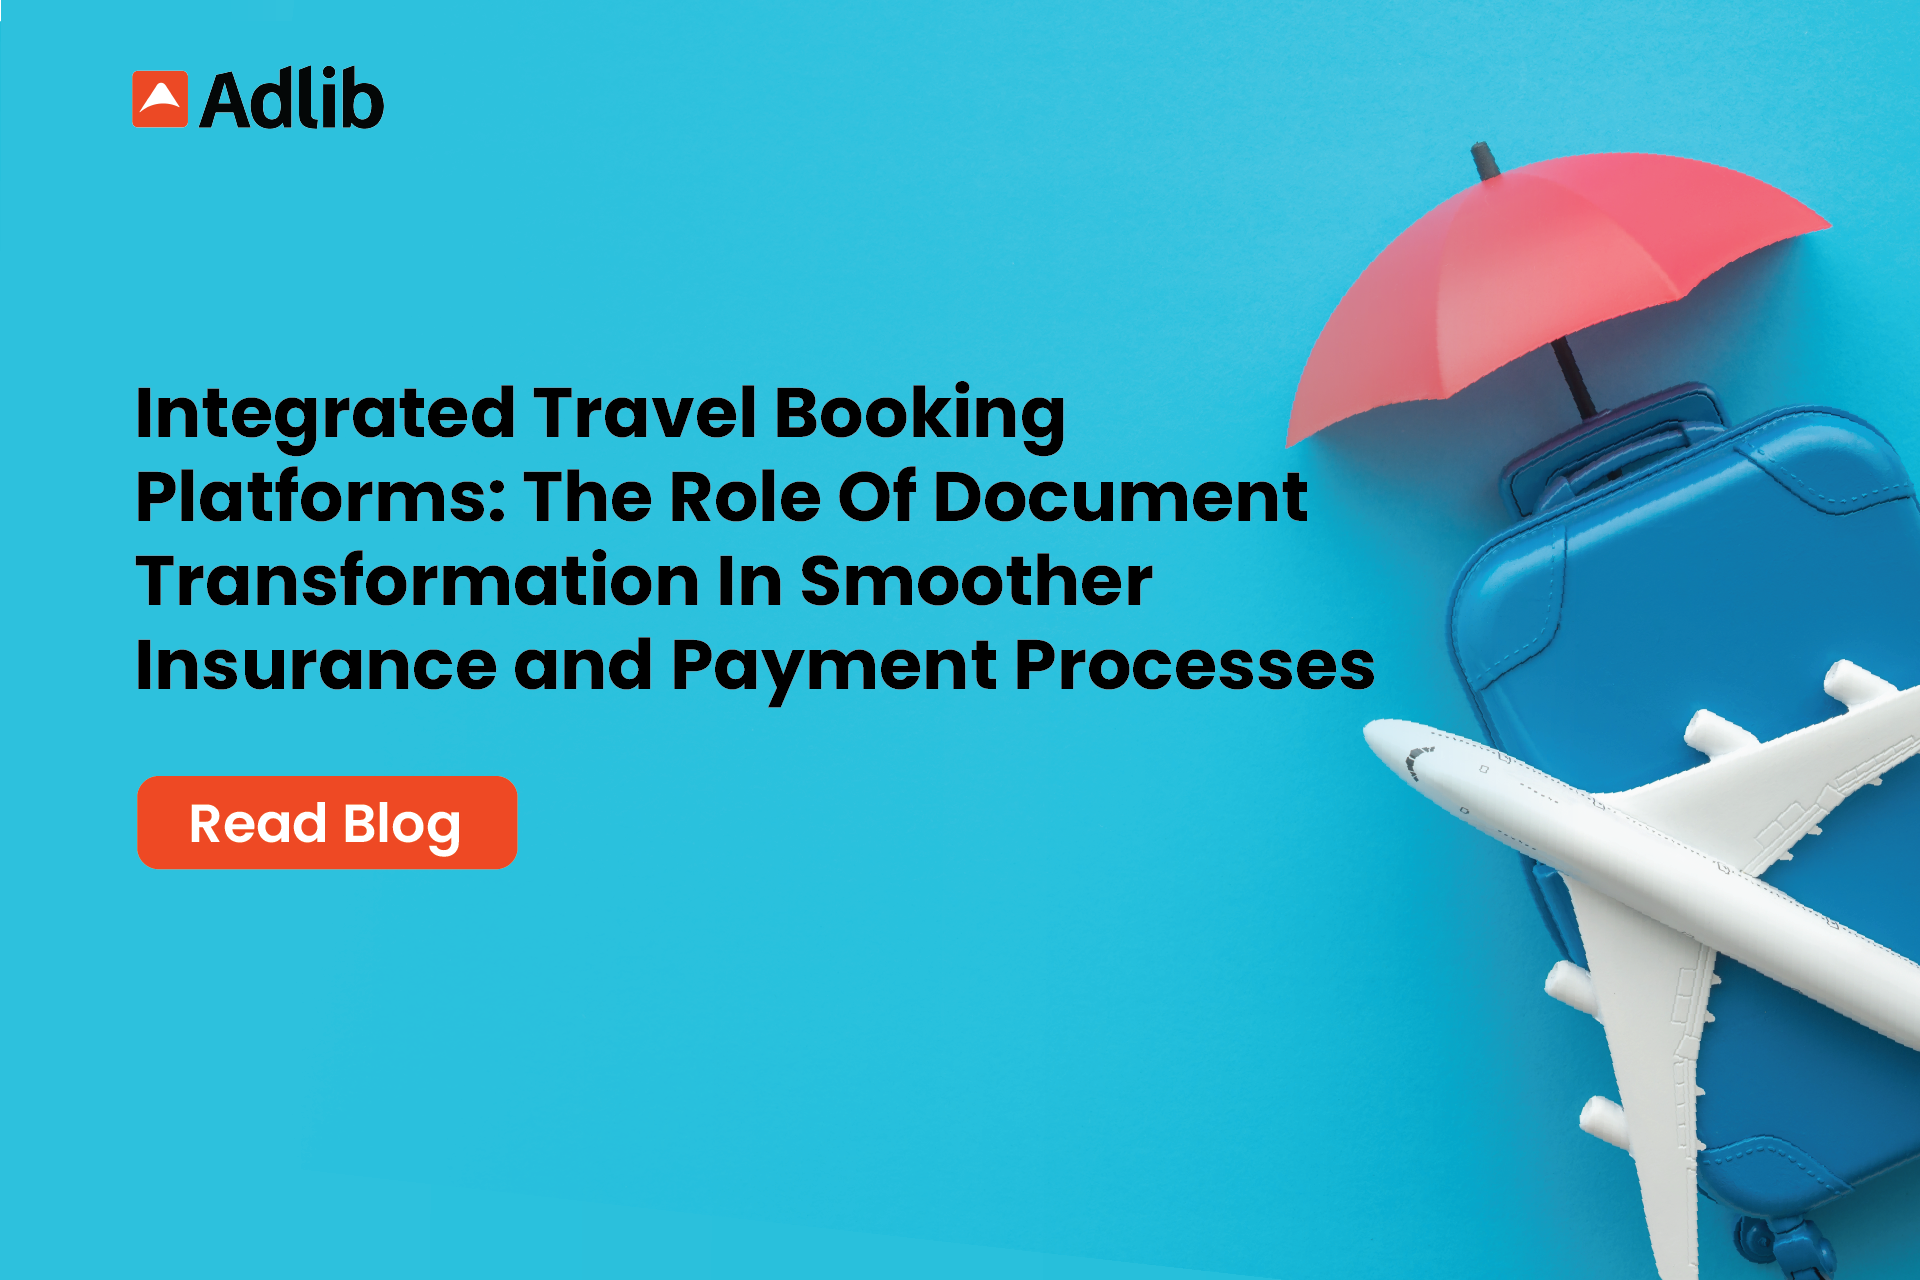 Integrated Travel Booking Platforms: The Role of Document Transformation and Auto-Classification For Smoother Insurance and Payment Processes Featured Image